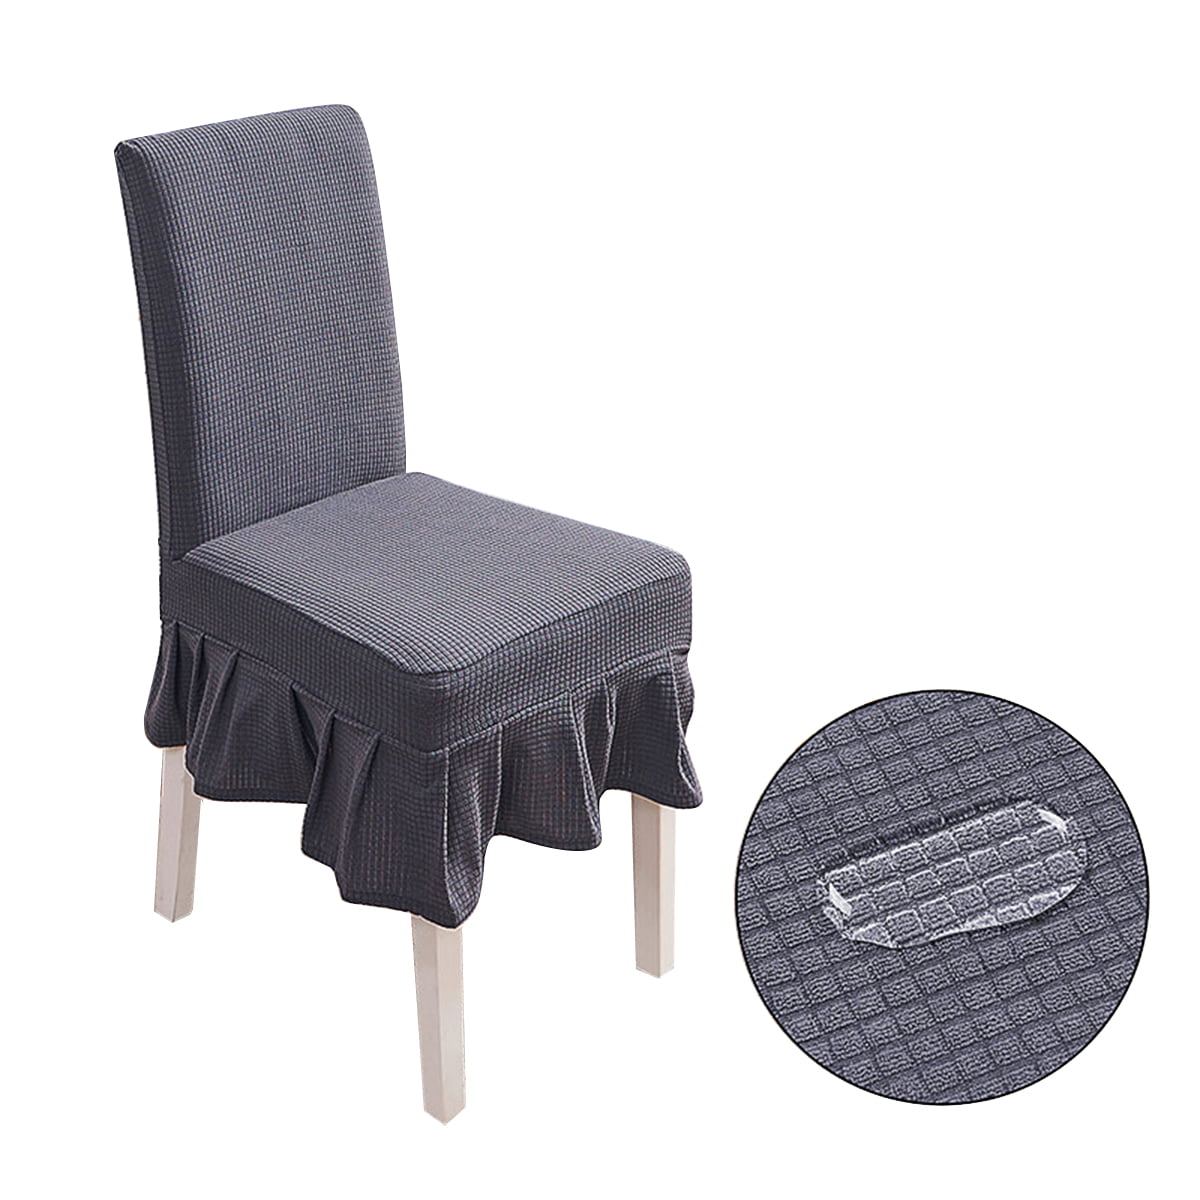 Details about   Round Chair Slipcover Banquet Wedding Party Dining Seat Covers Stool Case Decors 